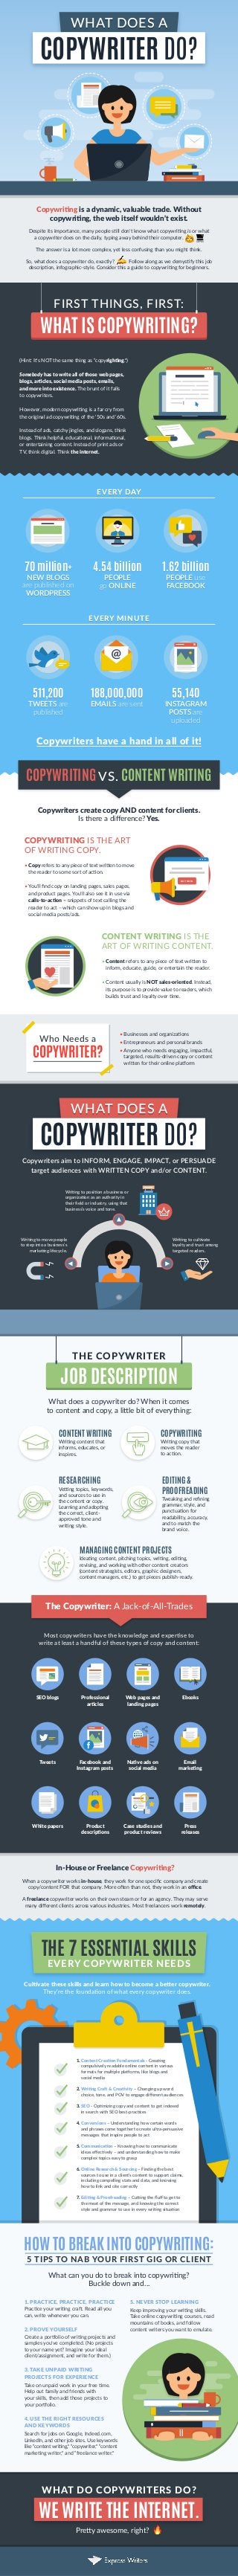 Copywriting is a dynamic, valuable trade. Without
copywriting, the web itself wouldn’t exist.
Despite its importance, many people still don’t know what copywriting is or what
The answer is a lot more complex, yet less confusing than you might think.
So, what does a copywriter do, exactly? Follow along as we demystify this job
description, infographic-style. Consider this a guide to copywriting for beginners.
(Hint: It’s NOT the same thing as “copyrighting.”)
Somebody has to write all of those web pages,
blogs, articles, social media posts, emails,
and more into existence. The brunt of it falls
to copywriters.
However, modern copywriting is a far cry from
the original ad copywriting of the ‘50s and ‘60s.
Instead of ads, catchy jingles, and slogans, think
blogs. Think helpful, educational, informational,
or entertaining content. Instead of print ads or
TV, think digital. Think the internet.
EVERY DAY
EVERY MINUTE
Copywriters have a hand in all of it!
COPYWRITING VS. CONTENT WRITING
Copywriters create copy AND content for clients.
Is there a diﬀerence? Yes.
What does a copywriter do? When it comes
to content and copy, a little bit of everything:
Copywriters aim to INFORM, ENGAGE, IMPACT, or PERSUADE
target audiences with WRITTEN COPY and/or CONTENT.
COPYWRITING IS THE ART
OF WRITING COPY.
� Copy refers to any piece of text written to move
the reader to some sort of action.
� You’ll ﬁnd copy on landing pages, sales pages,
and product pages. You’ll also see it in use via
calls-to-action – snippets of text calling the
reader to act – which can show up in blogs and
social media posts/ads.
CONTENT WRITING IS THE
ART OF WRITING CONTENT.
� Content refers to any piece of text written to
inform, educate, guide, or entertain the reader.
� Content usually is NOT sales-oriented. Instead,
its purpose is to provide value to readers, which
builds trust and loyalty over time.
WHAT DOES A
� Businesses and organizations
� Entrepreneurs and personal brands
� Anyone who needs engaging, impactful,
targeted, results-driven copy or content
written for their online platform
Writing to move people
to step into a business’s
marketing lifecycle.
Writing to cultivate
loyalty and trust among
targeted readers.
Writing to position a business or
organization as an authority in
their ﬁeld or industry, using that
business’s voice and tone.
CONTENT WRITING
Writing content that
informs, educates, or
inspires.
COPYWRITING
Writing copy that
moves the reader
to action.
EDITING &
PROOFREADING
Tweaking and reﬁning
grammar, style, and
punctuation for
readability, accuracy,
and to match the
brand voice.
RESEARCHING
Vetting topics, keywords,
and sources to use in
the content or copy.
Learning and adopting
the correct, client-
approved tone and
writing style.
MANAGING CONTENT PROJECTS
Ideating content, pitching topics, writing, editing,
revising, and working with other content creators
(content strategists, editors, graphic designers,
content managers, etc.) to get pieces publish-ready.
The Copywriter: A Jack-of-All-Trades
Most copywriters have the knowledge and expertise to
write at least a handful of these types of copy and content:
In-House or Freelance Copywriting?
When a copywriter works in-house, they work for one speciﬁc company and create
copy/content FOR that company. More often than not, they work in an oﬃce.
A freelance copywriter works on their own steam or for an agency. They may serve
many diﬀerent clients across various industries. Most freelancers work remotely.
SEO blogs Professional
articles
Web pages and
landing pages
Ebooks
Tweets Facebook and
Instagram posts
Native ads on
social media
Email
marketing
White papers Product
descriptions
Case studies and
product reviews
Press
releases
55,140
INSTAGRAM
POSTS are
uploaded
55,140
INSTAGRAM
POSTS are
uploaded
FIRST THINGS, FIRST:
WHAT IS COPYWRITING?
70 million+
NEW BLOGS
are published on
WORDPRESS
4.54 billion
PEOPLE
go ONLINE
1.62 billion
PEOPLE use
FACEBOOK
511,200
TWEETS are
published
511,200
TWEETS are
published
70 million+
NEW BLOGS
are published on
WORDPRESS
4.54 billion
PEOPLE
go ONLINE
1.62 billion
PEOPLE use
FACEBOOK
188,000,000
EMAILS are sent
188,000,000
EMAILS are sent
WHAT DOES A
COPYWRITER DO?
WHAT DOES AWHAT DOES A
COPYWRITER DO?
THE 7 ESSENTIAL SKILLS
EVERY COPYWRITER NEEDS
1. Content Creation Fundamentals - Creating
compulsively readable online content in various
formats for multiple platforms, like blogs and
social media
2. Writing Craft & Creativity – Changing up word
choice, tone, and POV to engage diﬀerent audiences
3. SEO - Optimizing copy and content to get indexed
in search with SEO best-practices
4. Conversions – Understanding how certain words
and phrases come together to create ultra-persuasive
messages that inspire people to act
5. Communication – Knowing how to communicate
ideas eﬀectively – and understanding how to make
complex topics easy to grasp
6. Online Research & Sourcing – Finding the best
sources to use in a client’s content to support claims,
including compelling stats and data, and knowing
how to link and cite correctly
7. Editing & Proofreading – Cutting the ﬂuﬀ to get to
the meat of the message, and knowing the correct
style and grammar to use in every writing situation
HOW TO BREAK INTO COPYWRITING:
5 TIPS TO NAB YOUR FIRST GIG OR CLIENT
What can you do to break into copywriting?
Buckle down and…
THE COPYWRITER
JOB DESCRIPTION
Who Needs a
COPYWRITER?
Cultivate these skills and learn how to become a better copywriter.
They’re the foundation of what every copywriter does.
1. PRACTICE, PRACTICE, PRACTICE
Practice your writing craft. Read all you
can, write whenever you can.
2. PROVE YOURSELF
Create a portfolio of writing projects and
samples you’ve completed. (No projects
to your name yet? Imagine your ideal
client/assignment, and write for them.)
3. TAKE UNPAID WRITING
PROJECTS FOR EXPERIENCE
Take on unpaid work in your free time.
Help out family and friends with
your skills, then add those projects to
your portfolio.
4. USE THE RIGHT RESOURCES
AND KEYWORDS
Search for jobs on Google, Indeed.com,
LinkedIn, and other job sites. Use keywords
like “content writing,” “copywriter,” “content
marketing writer,” and “freelance writer.”
5. NEVER STOP LEARNING
Keep improving your writing skills.
Take online copywriting courses, read
mountains of books, and follow
content writers you want to emulate.
WHAT DO COPYWRITERS DO?
WE WRITE THE INTERNET.
Pretty awesome, right?
BUY NOW
a copywriter does on the daily, typing away behind their computer.
EVERY DAY
EVERY MINUTE
 